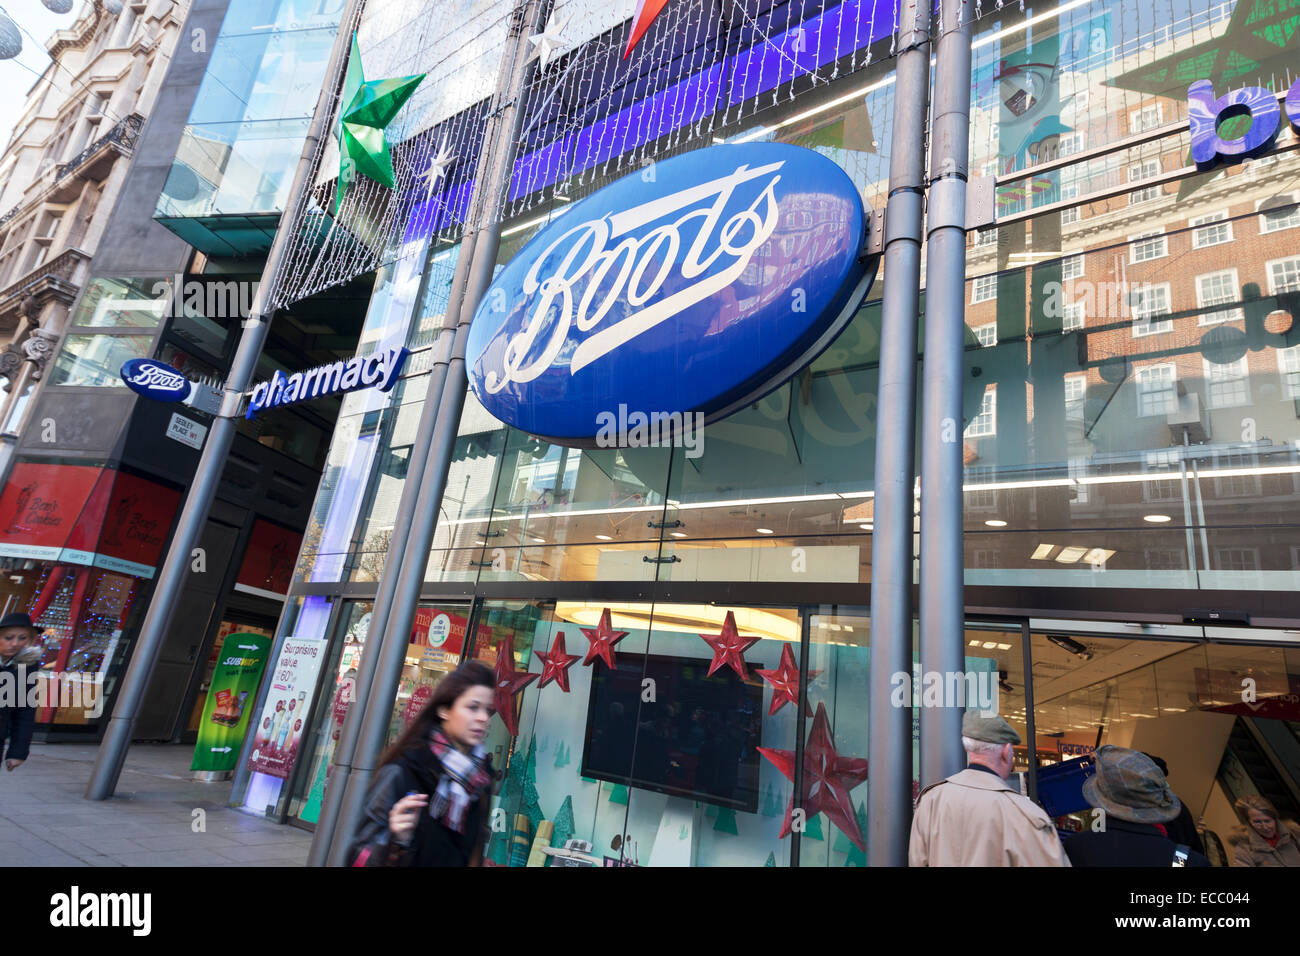 Boots the chemist on Oxford Street Stock Photo